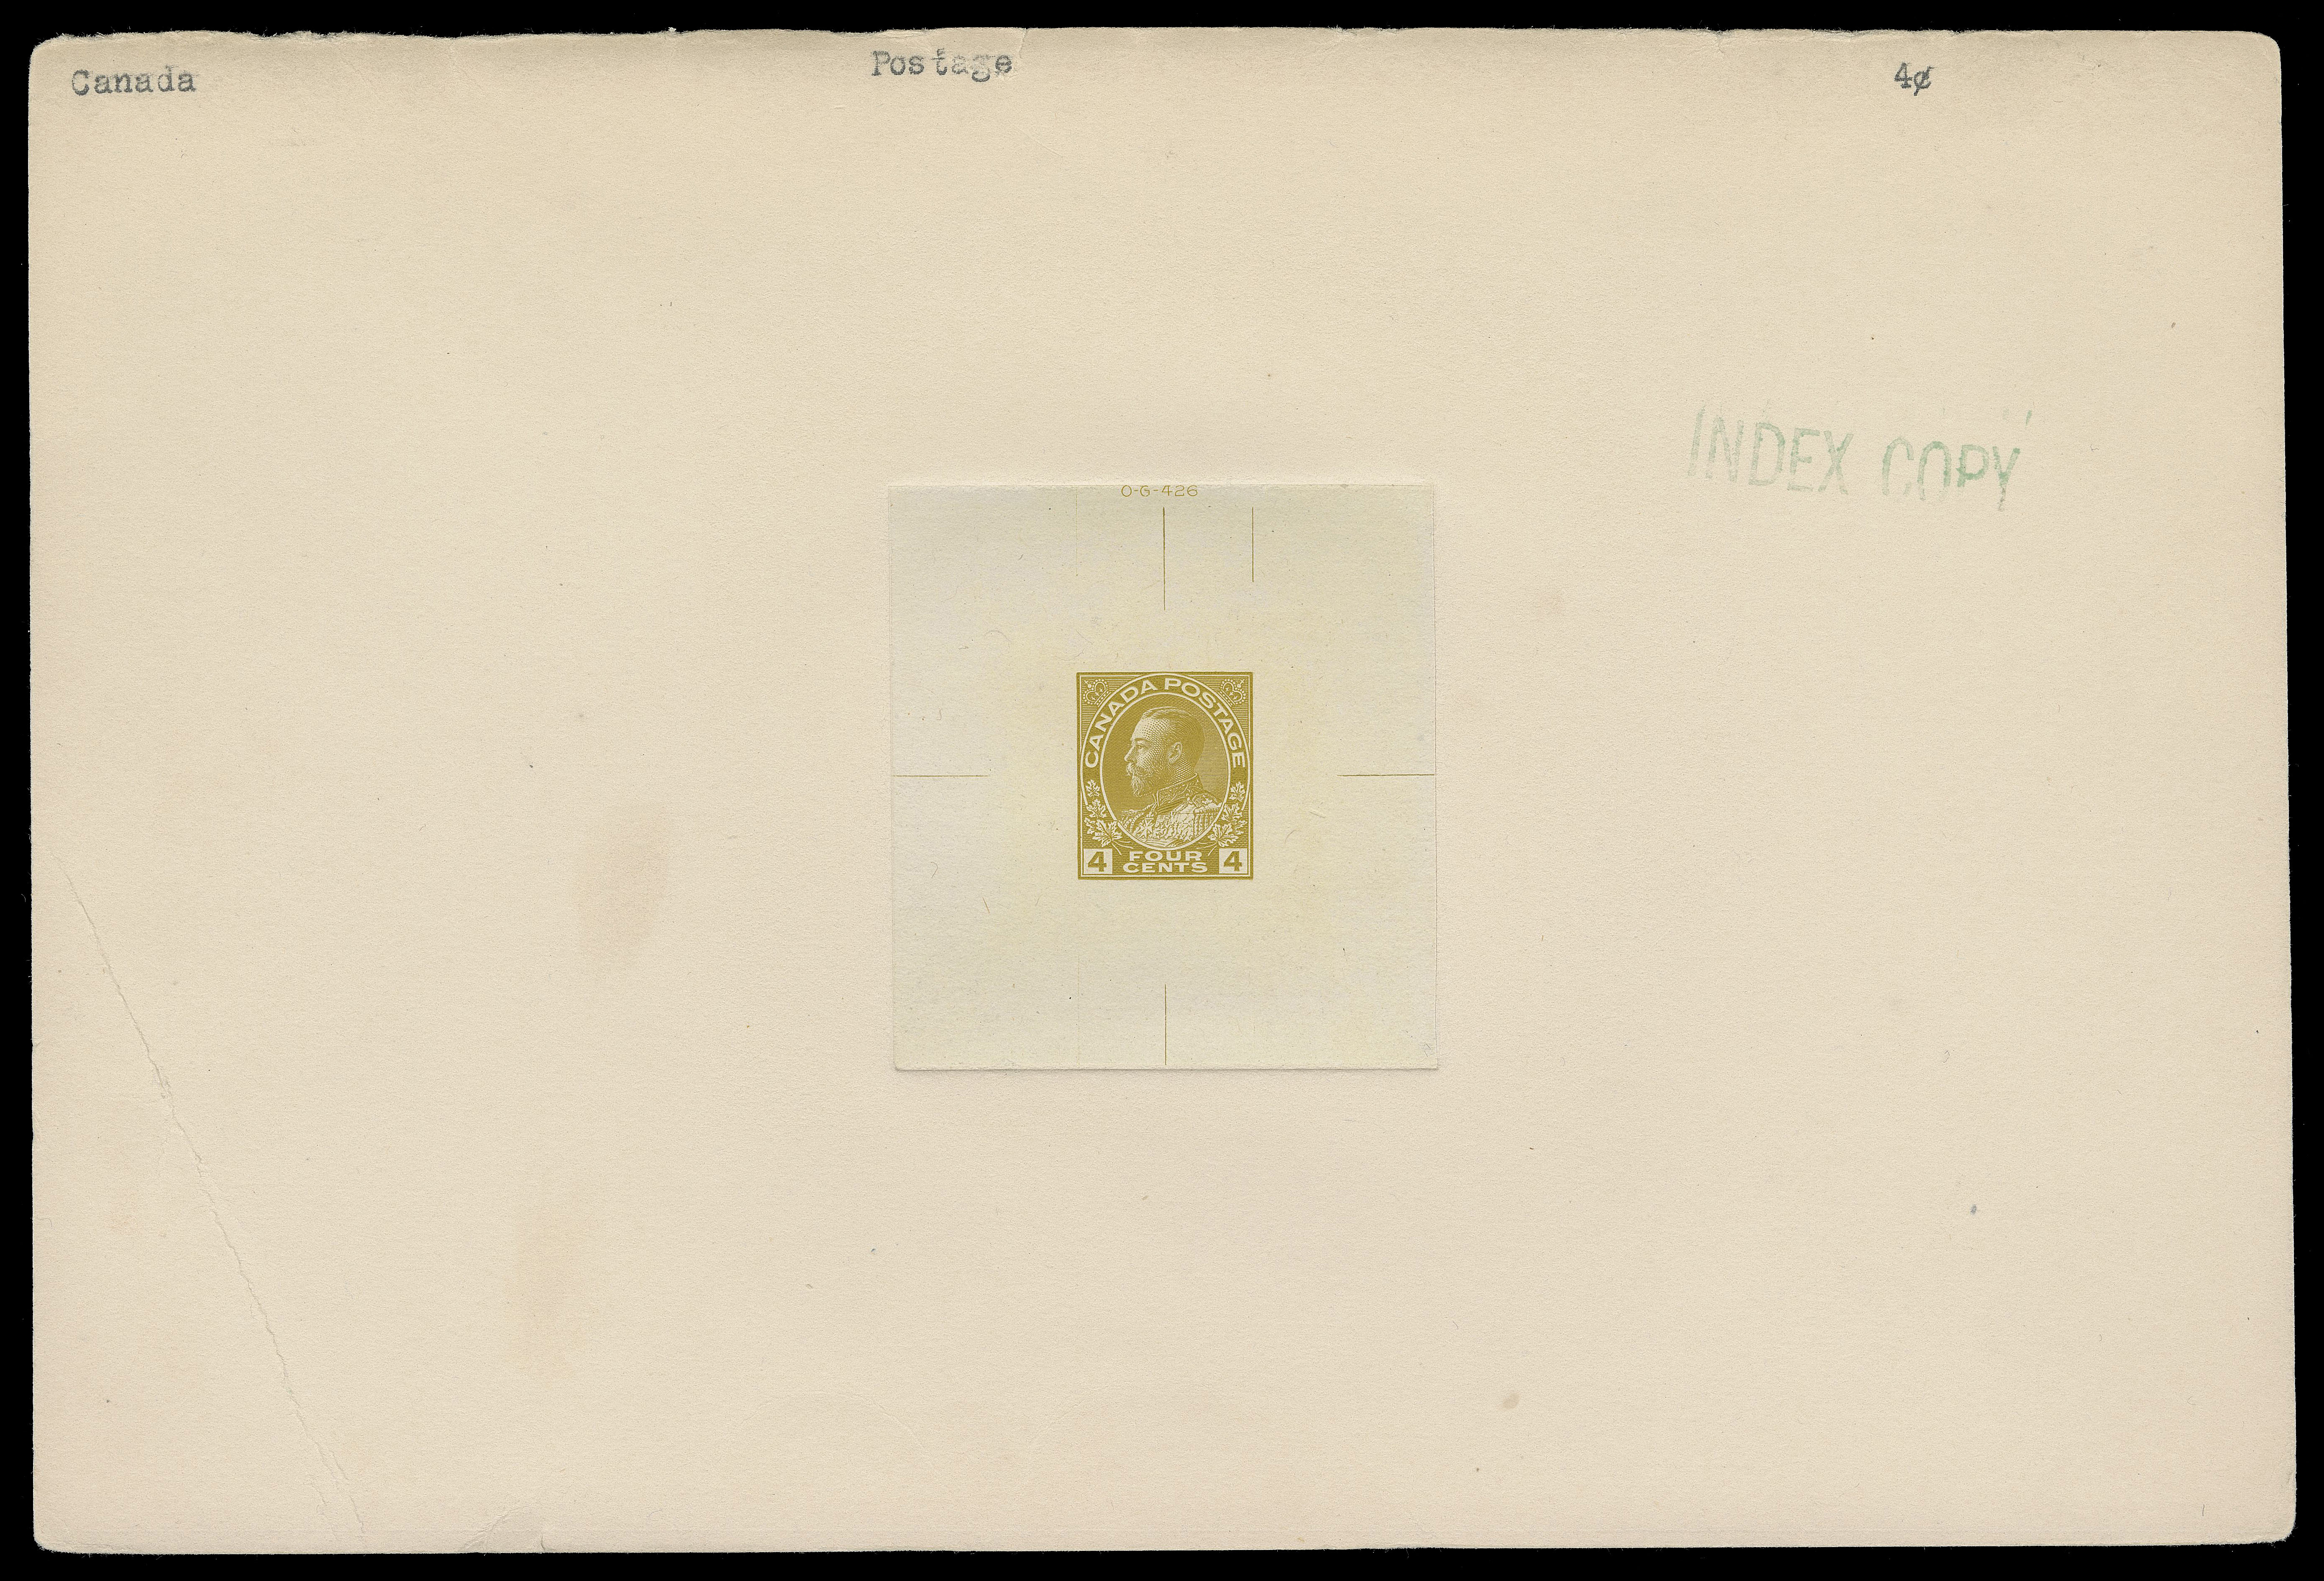 ADMIRAL PROOFS  110,Large Die Proof, printed in olive bistre, issued colour, on india paper 55 x 59mm, die sunk on full-size card 228 x 153mm, showing die number "OG-426" at top and unusual engraver